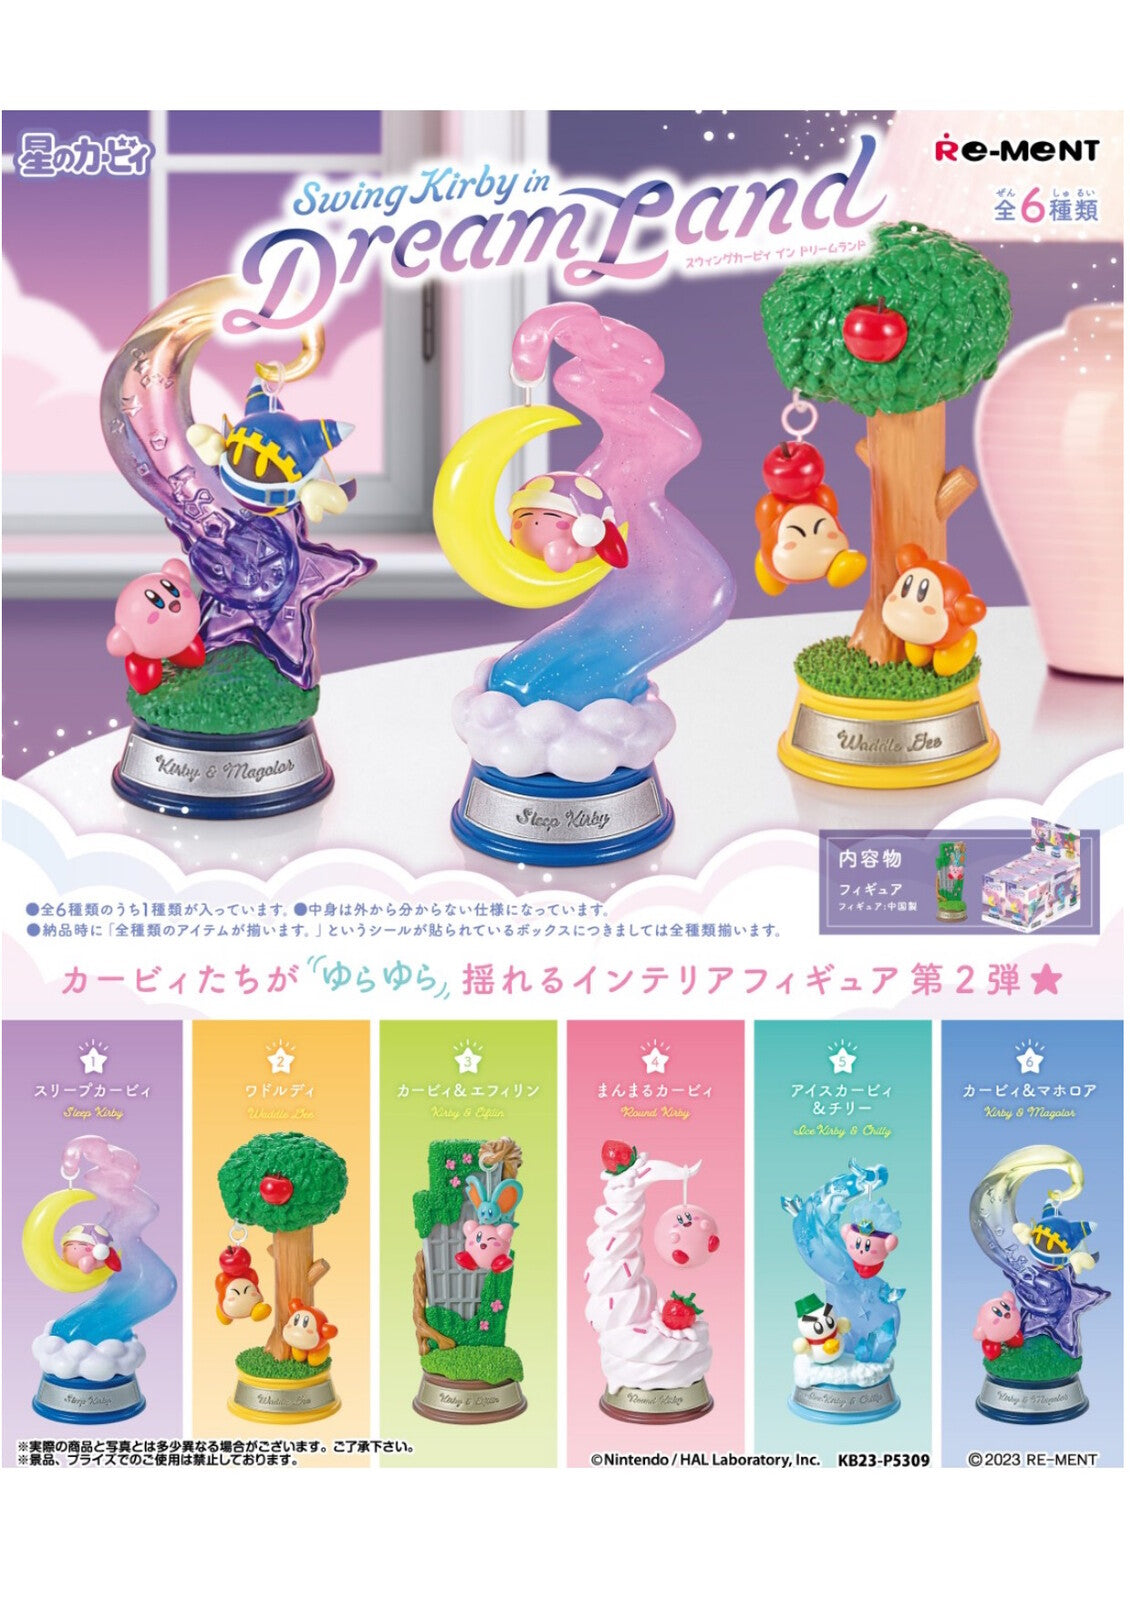 Re-Ment Swing Kirby in Dream Land - Blind Box - 1 PCS